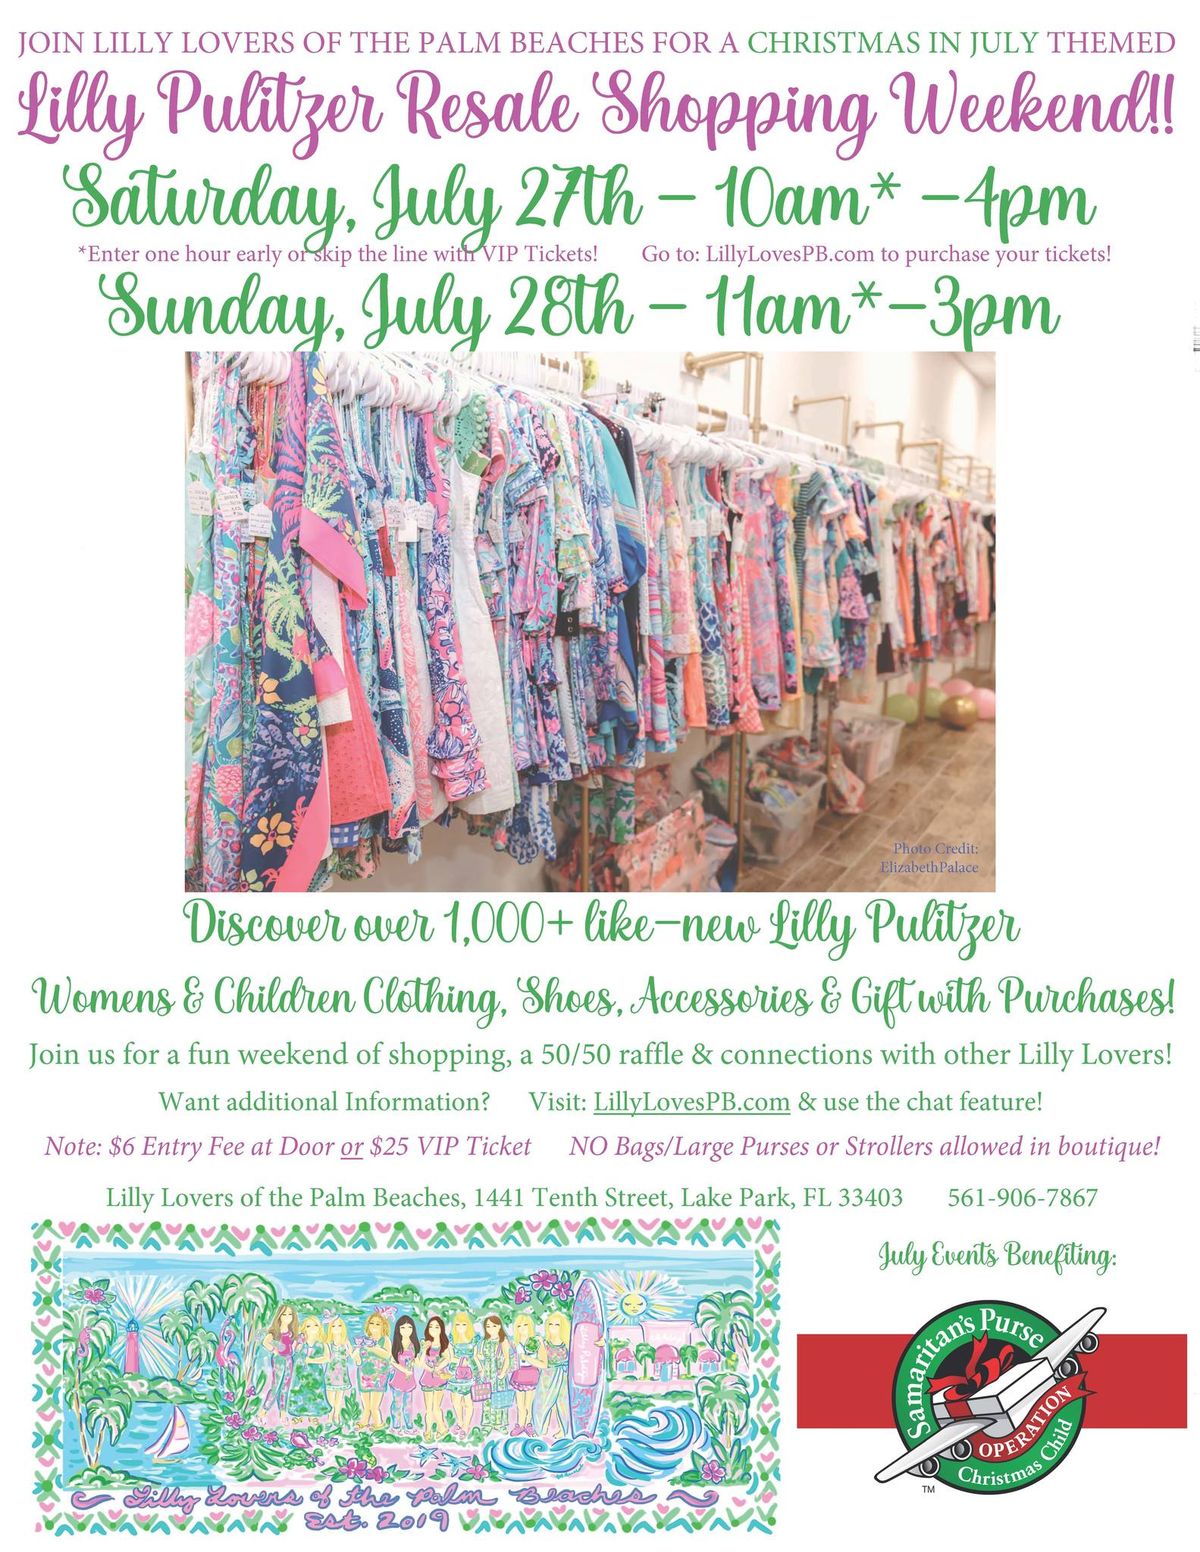 LILLY PULITZER JULY RESALE SHOPPING WEEKEND BY LILLY LOVERS OF THE PALM BEACHES